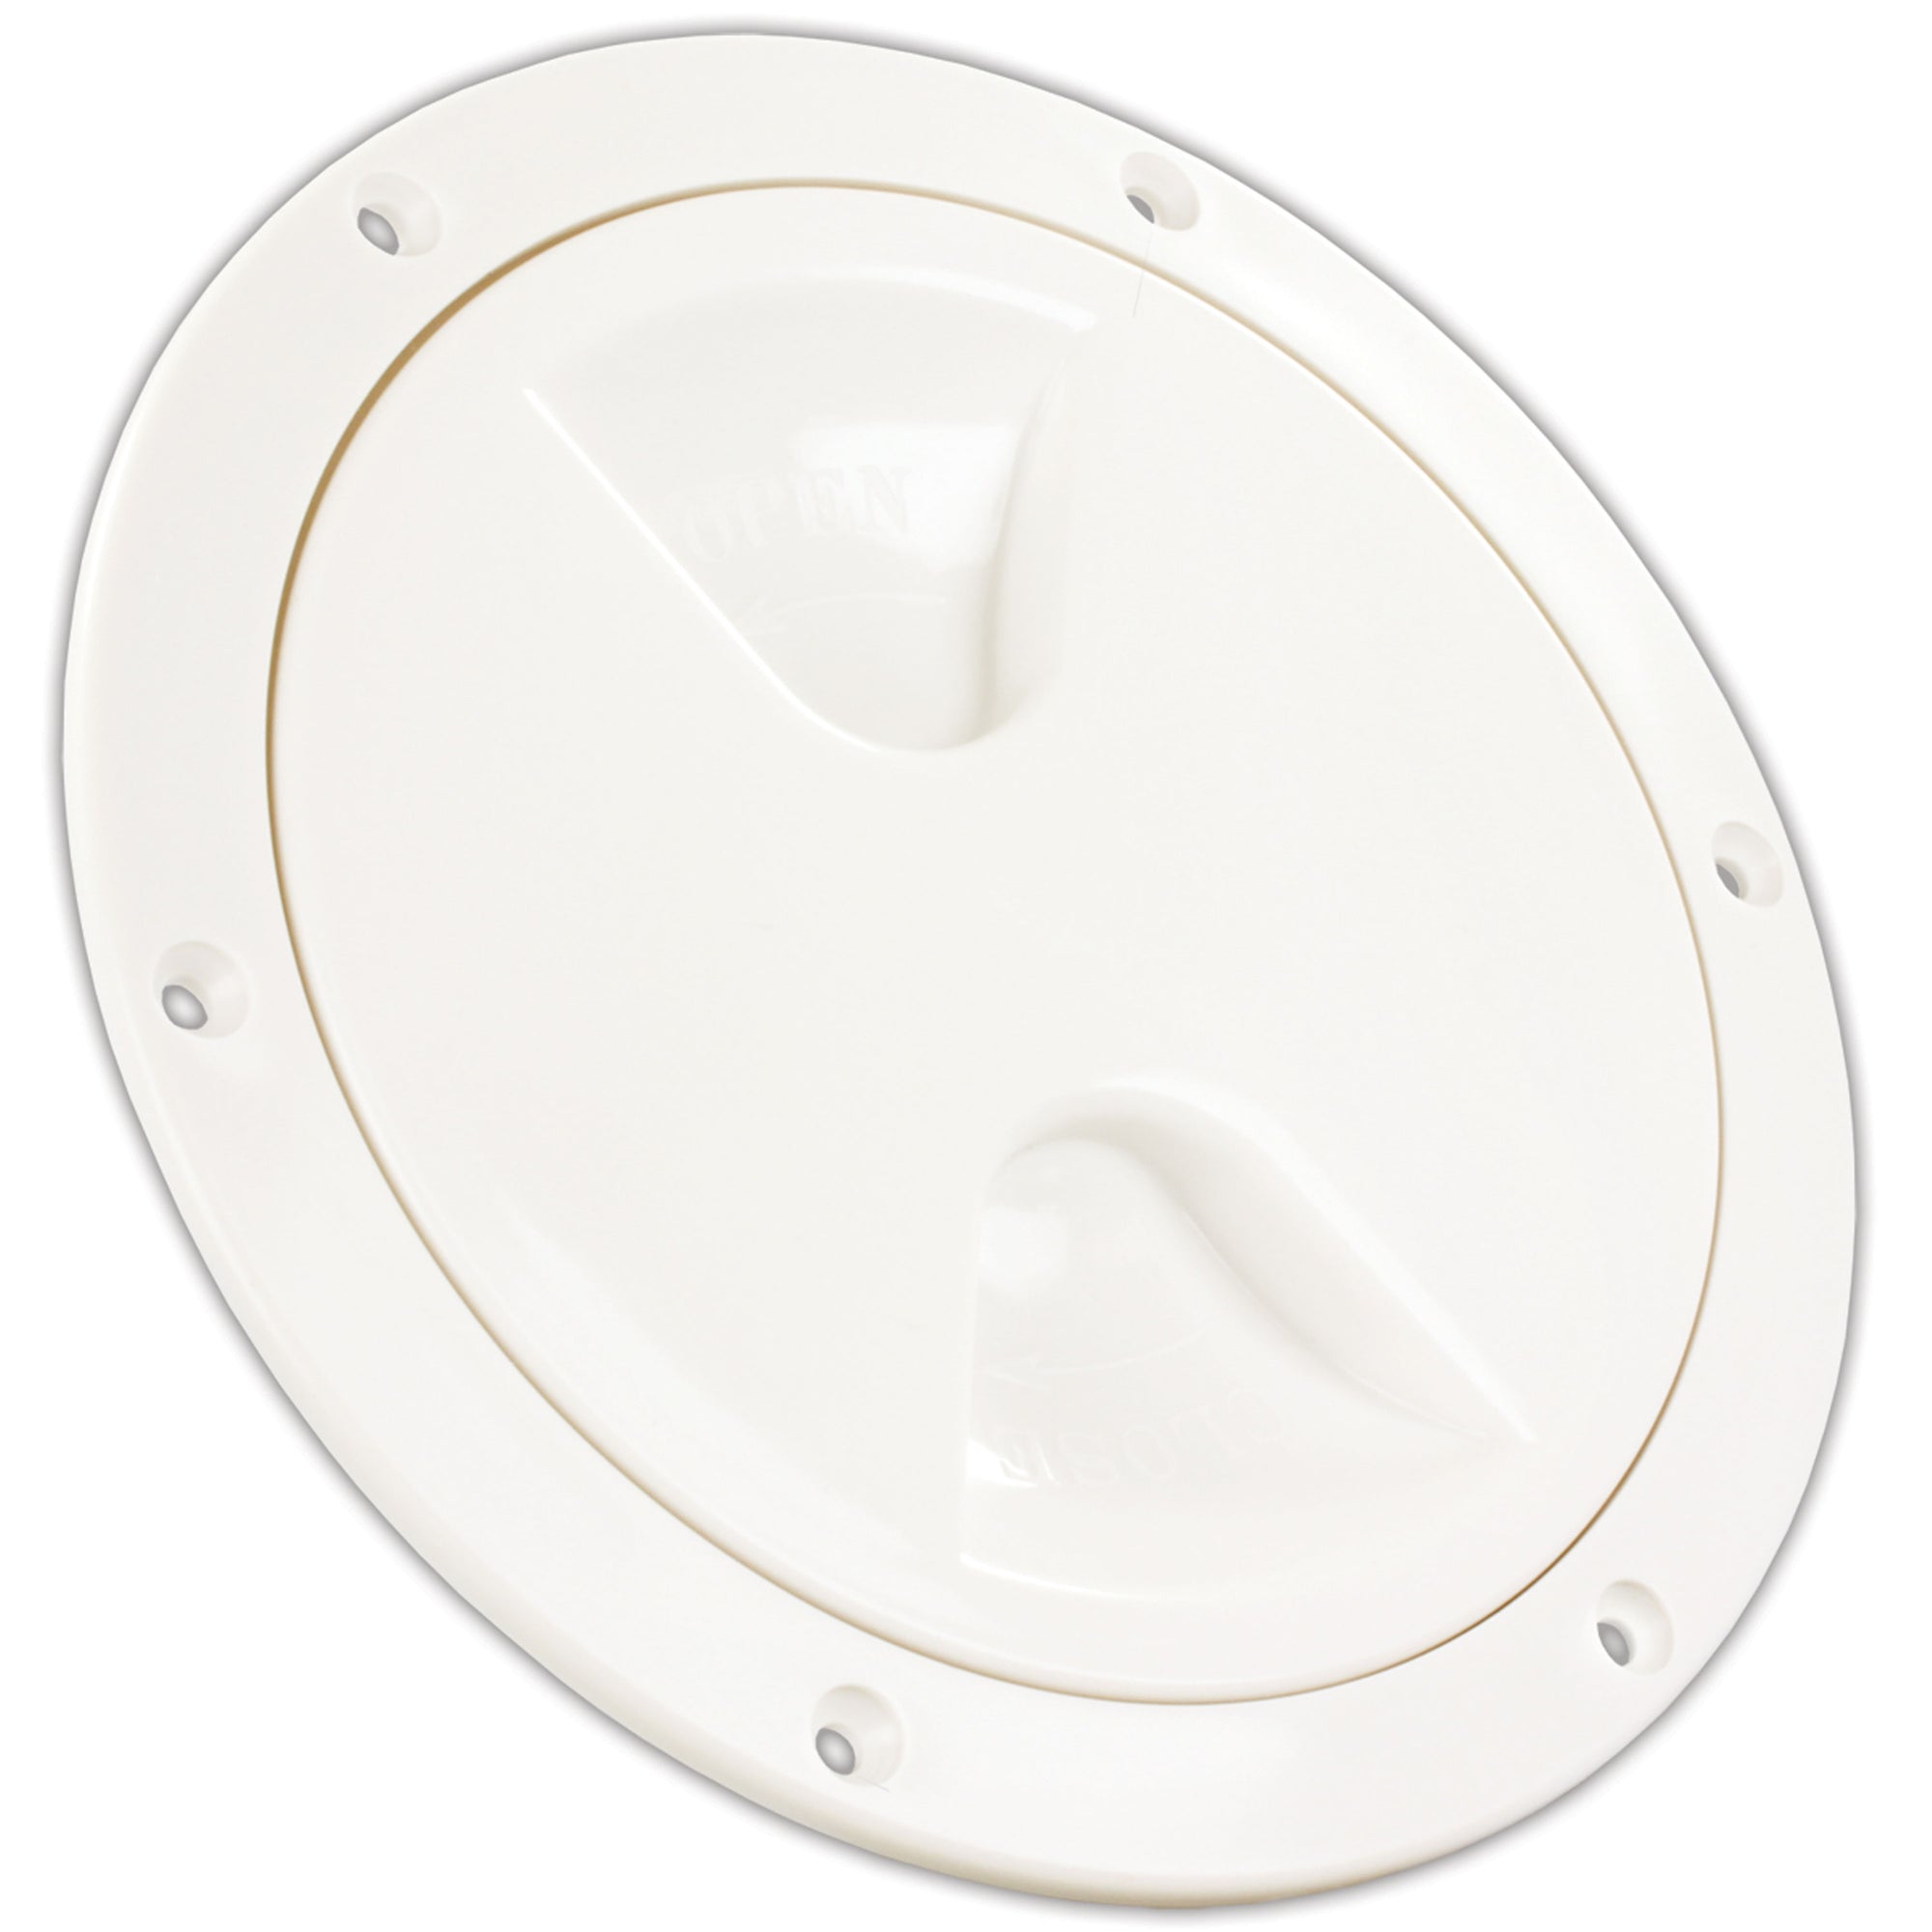 JR Products 31025 Access/Deck Plate - 5", White